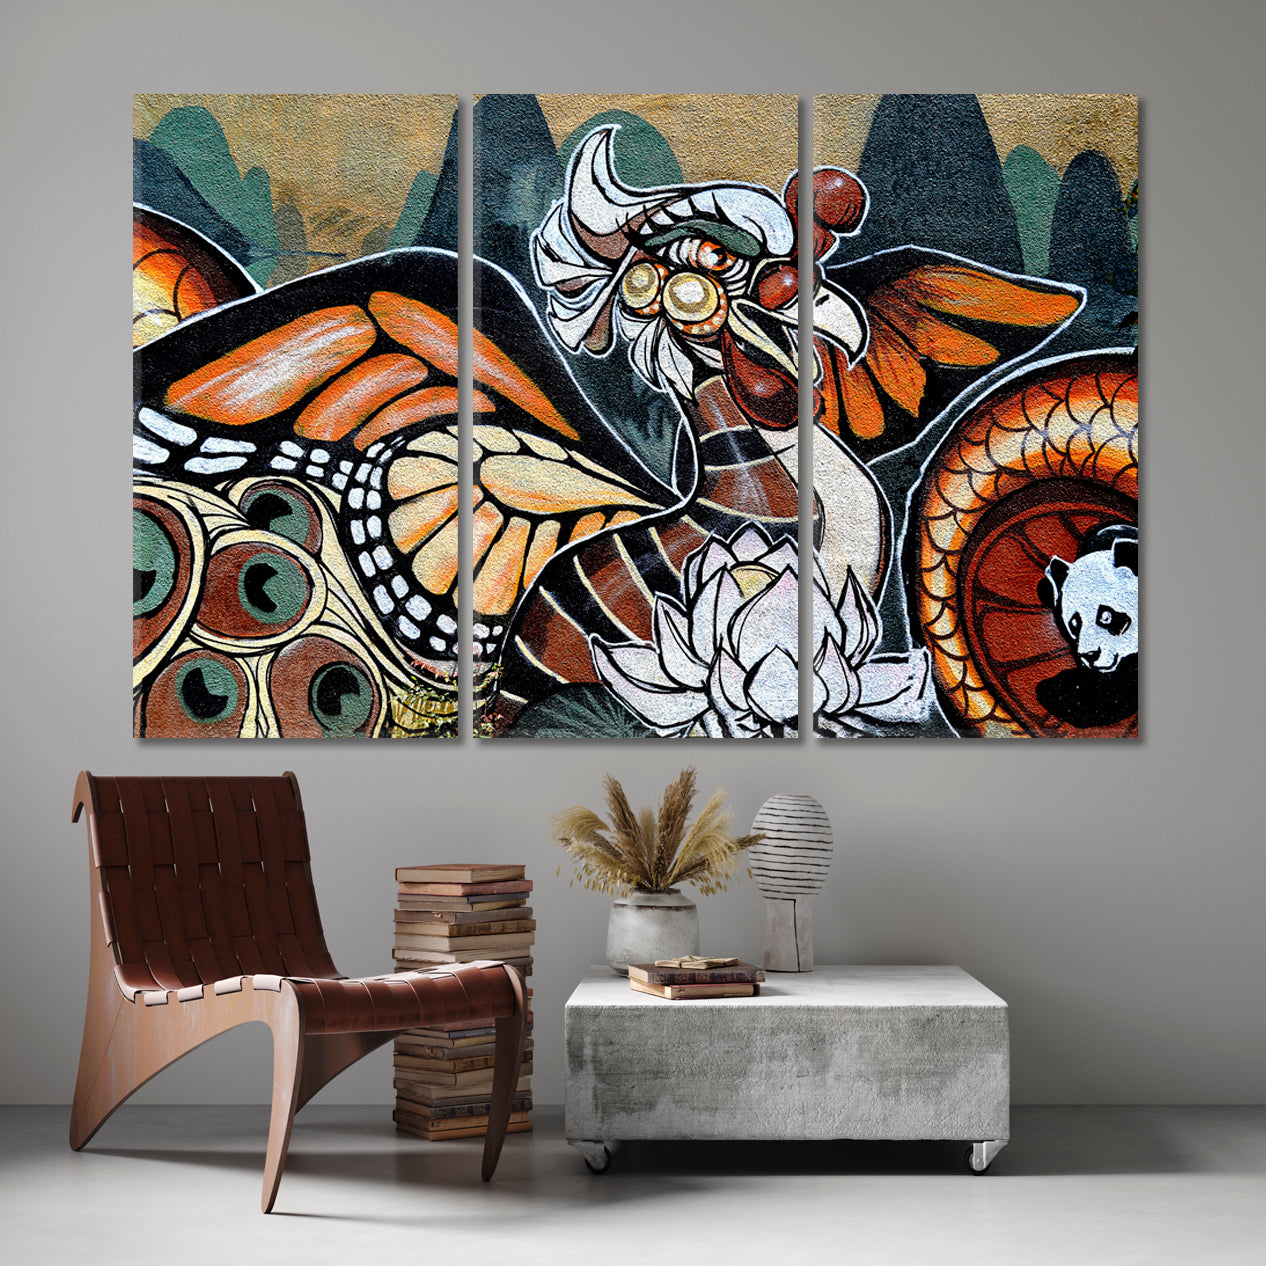 Colorful Graffiti Street Art Abstract Contemporary Abstract Art Print Artesty 3 panels 36" x 24" 